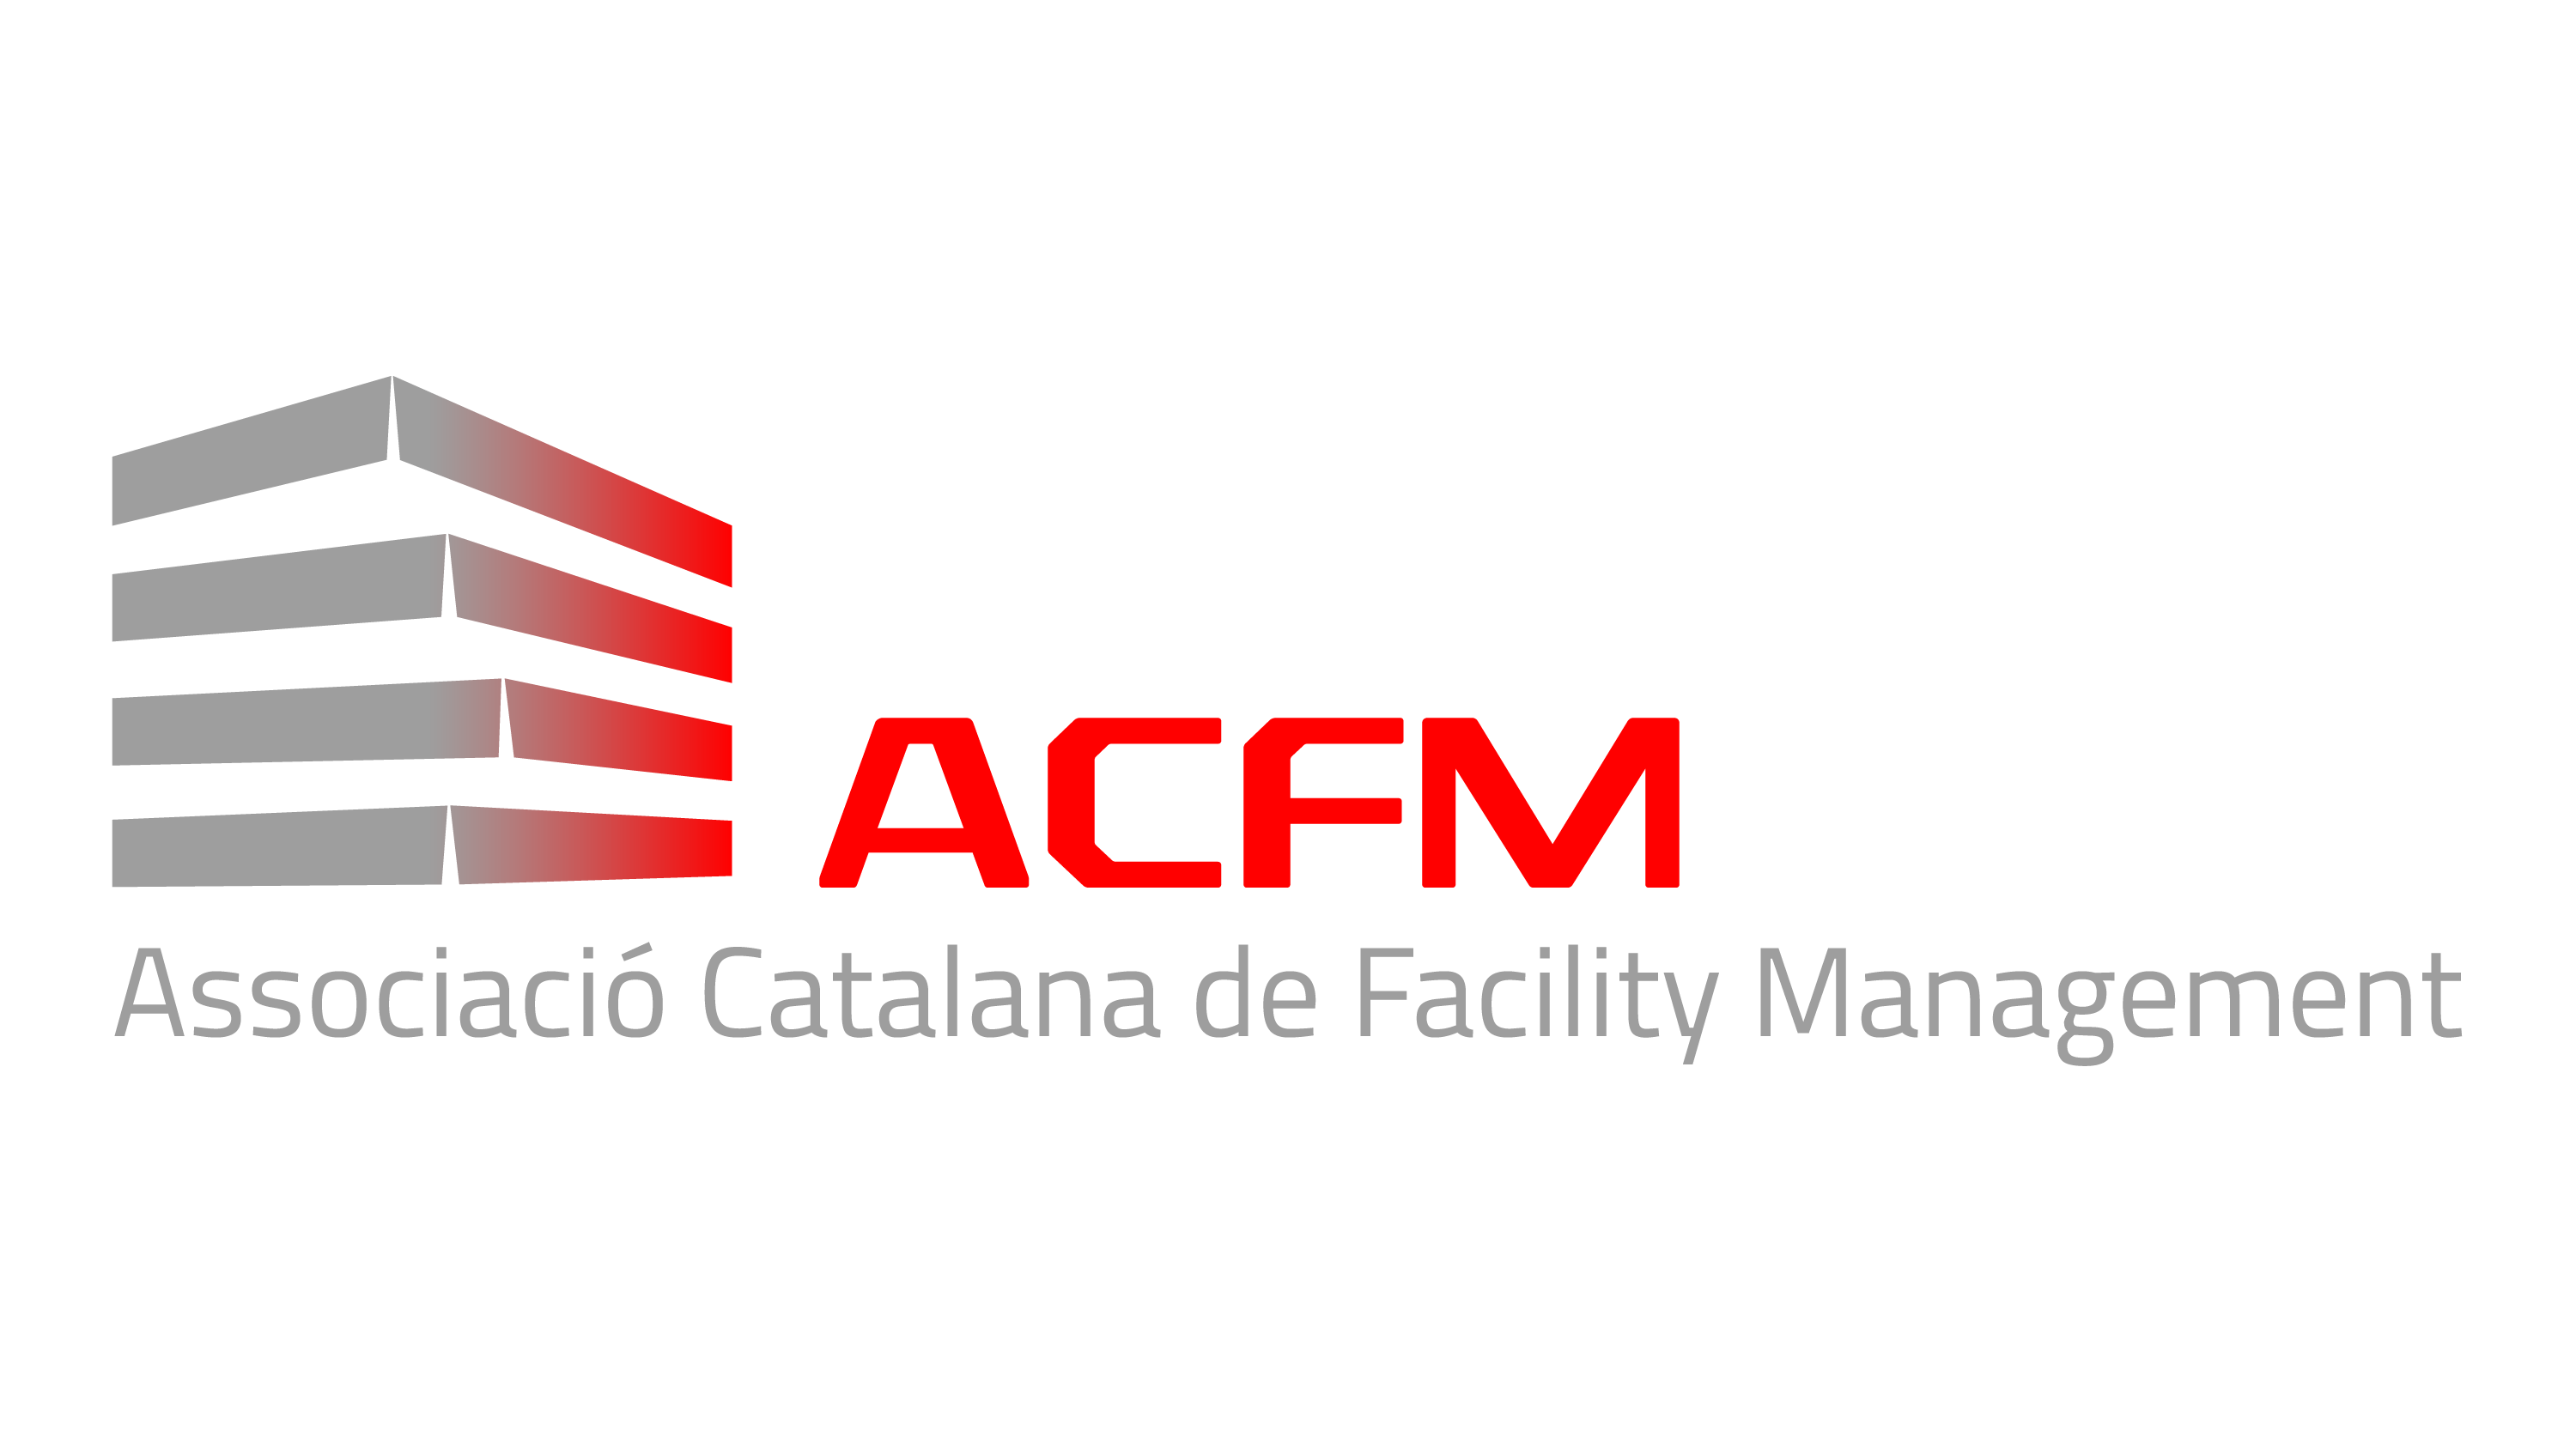 ACFM – The Catalan Association of Facility Management